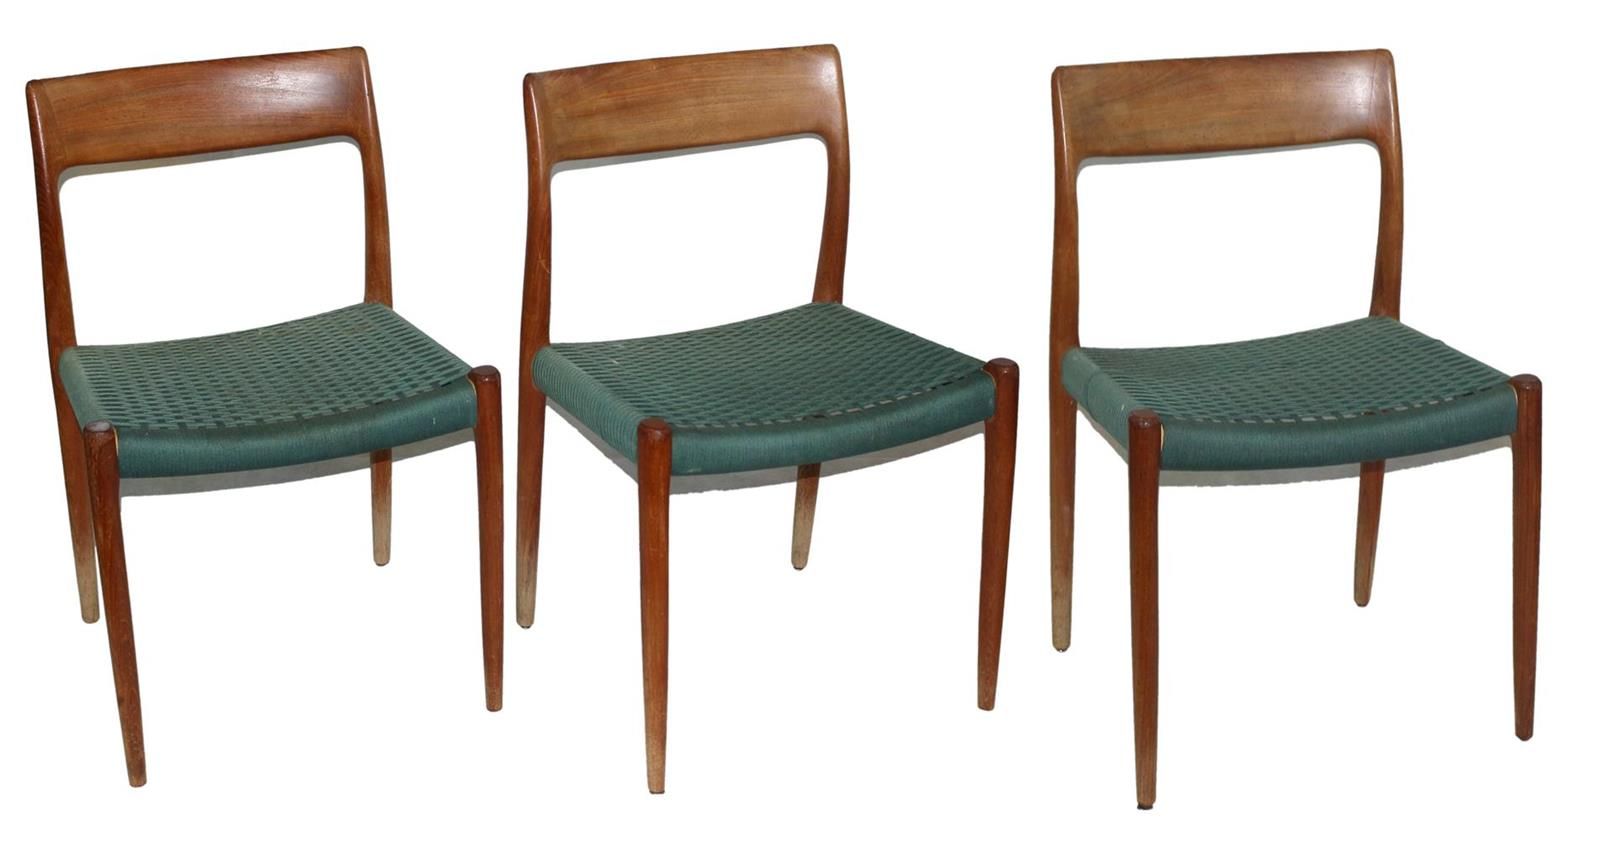 Niels OTTO MOLLER for J.L.Moller furniture factory Denmark. 3 chairs model 75 wi&hellip;